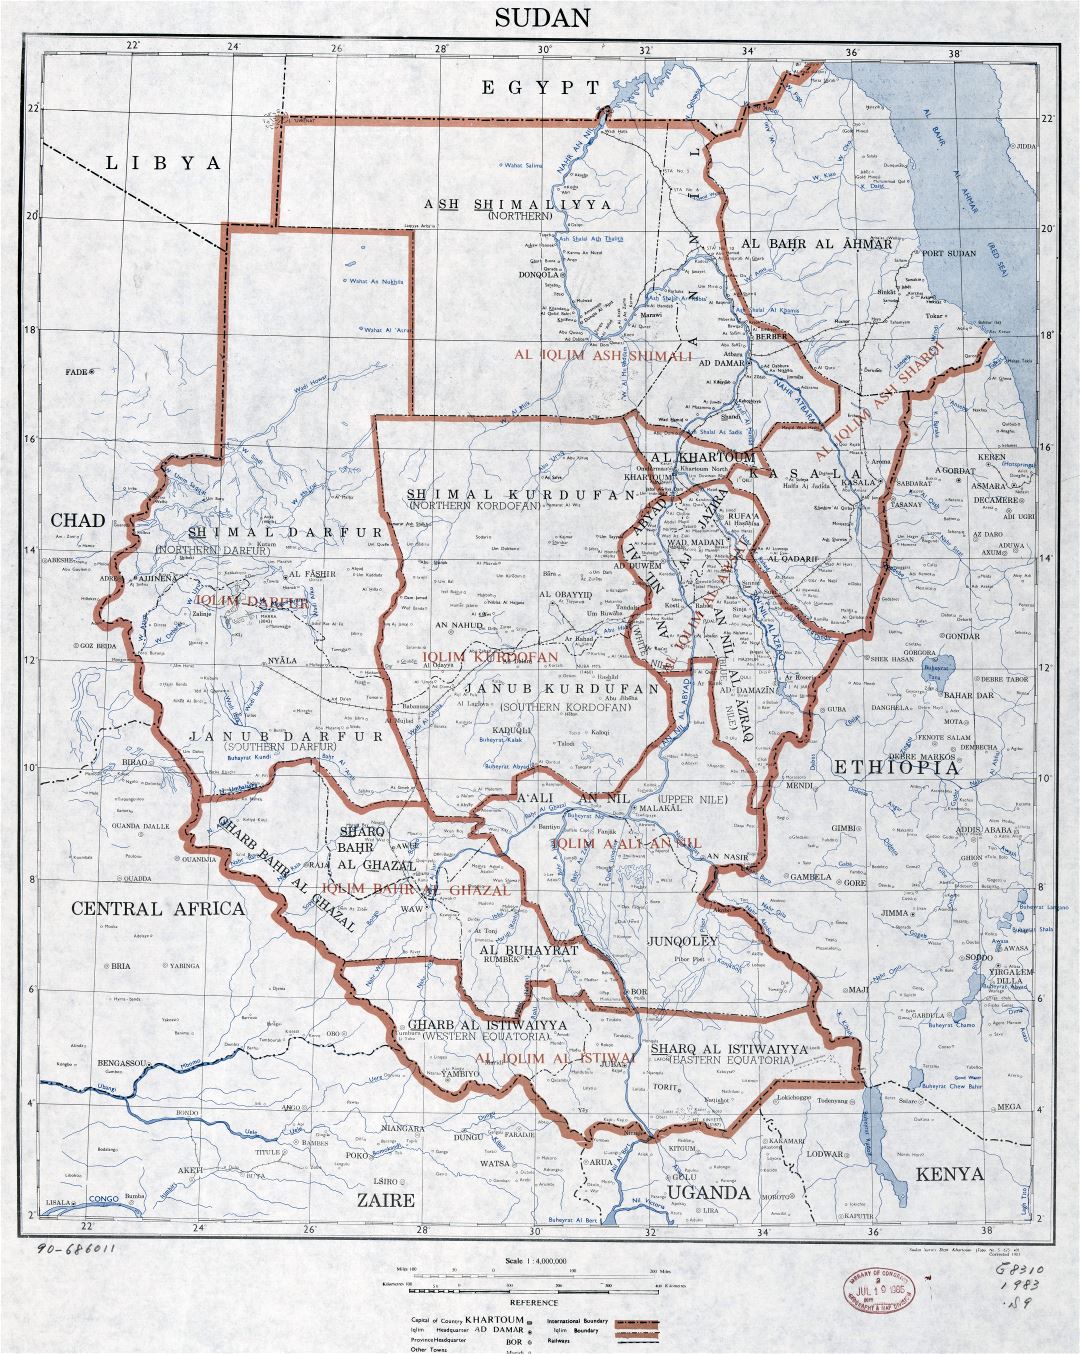 Large scale detailed political and administrative map of Sudan with railroads and cities - 1983